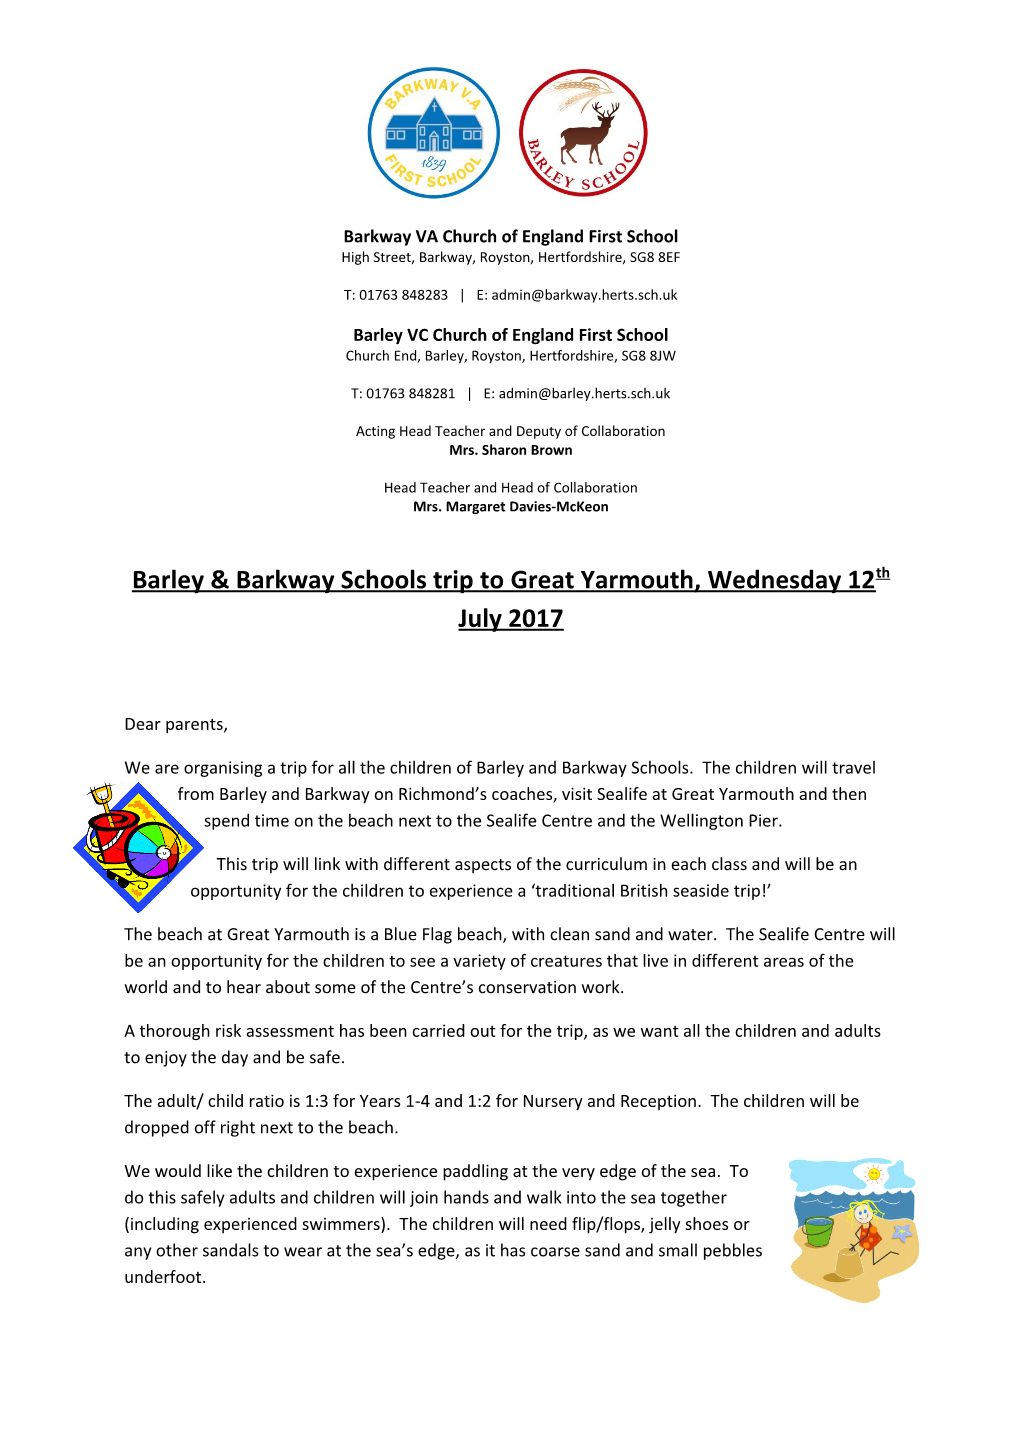 Barley & Barkway Schools Trip to Great Yarmouth, Wednesday 12Th July 2017